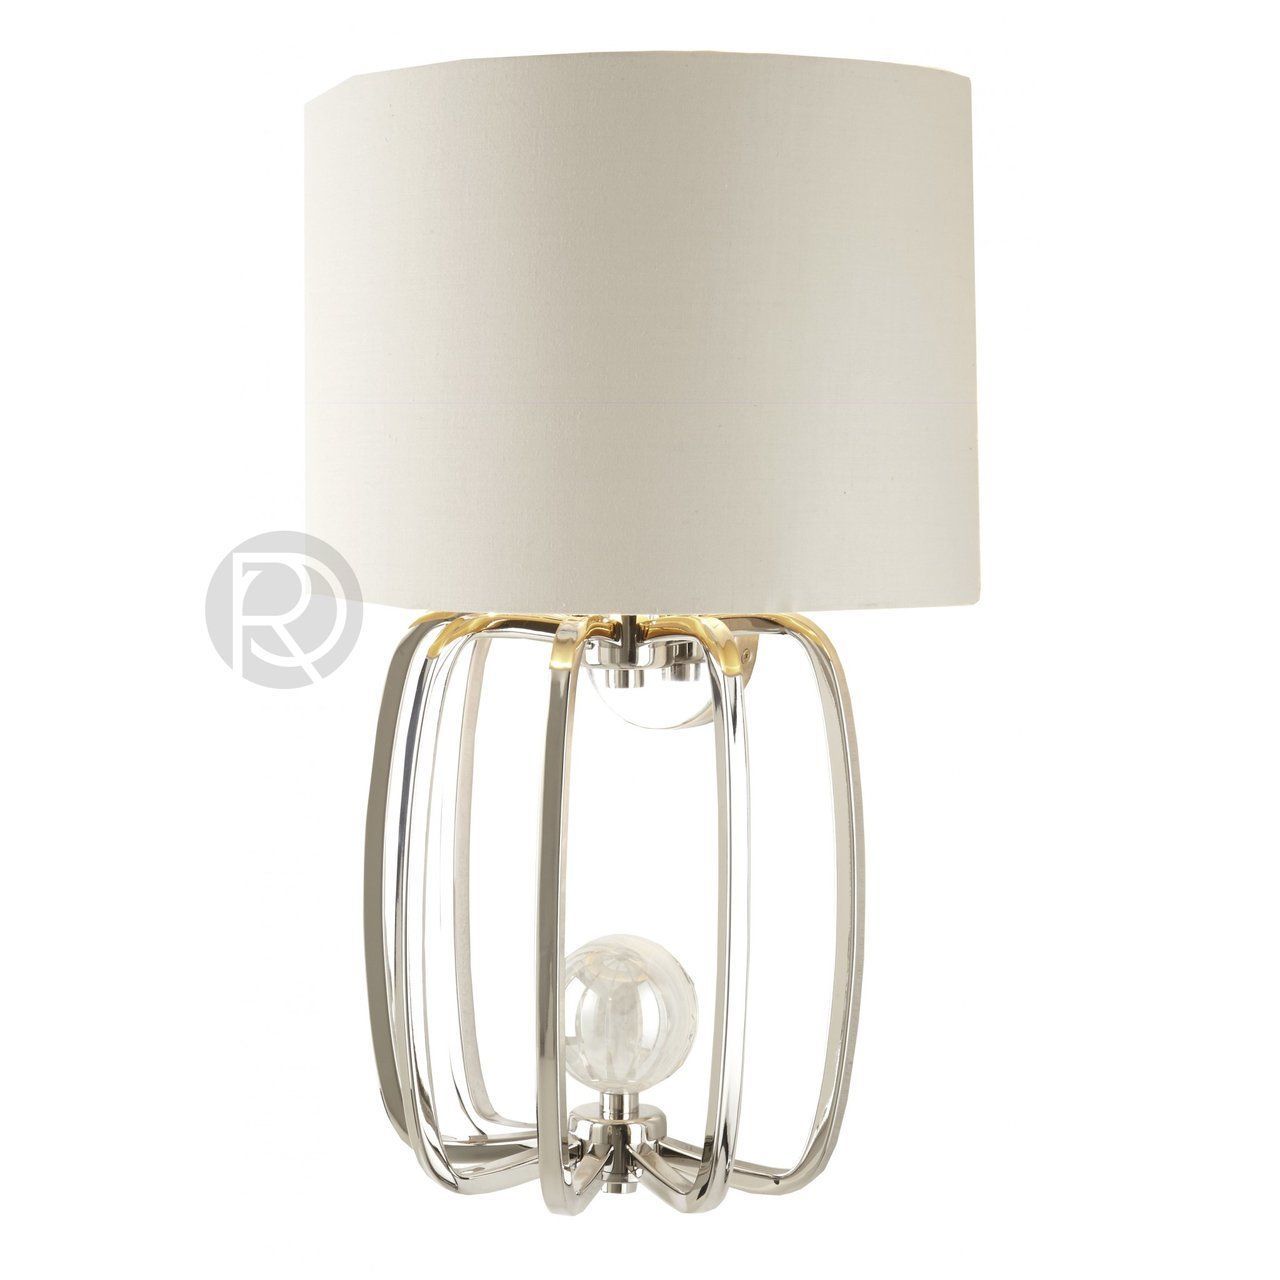 Wall lamp (Sconce) NICKEL CAGE by RV Astley